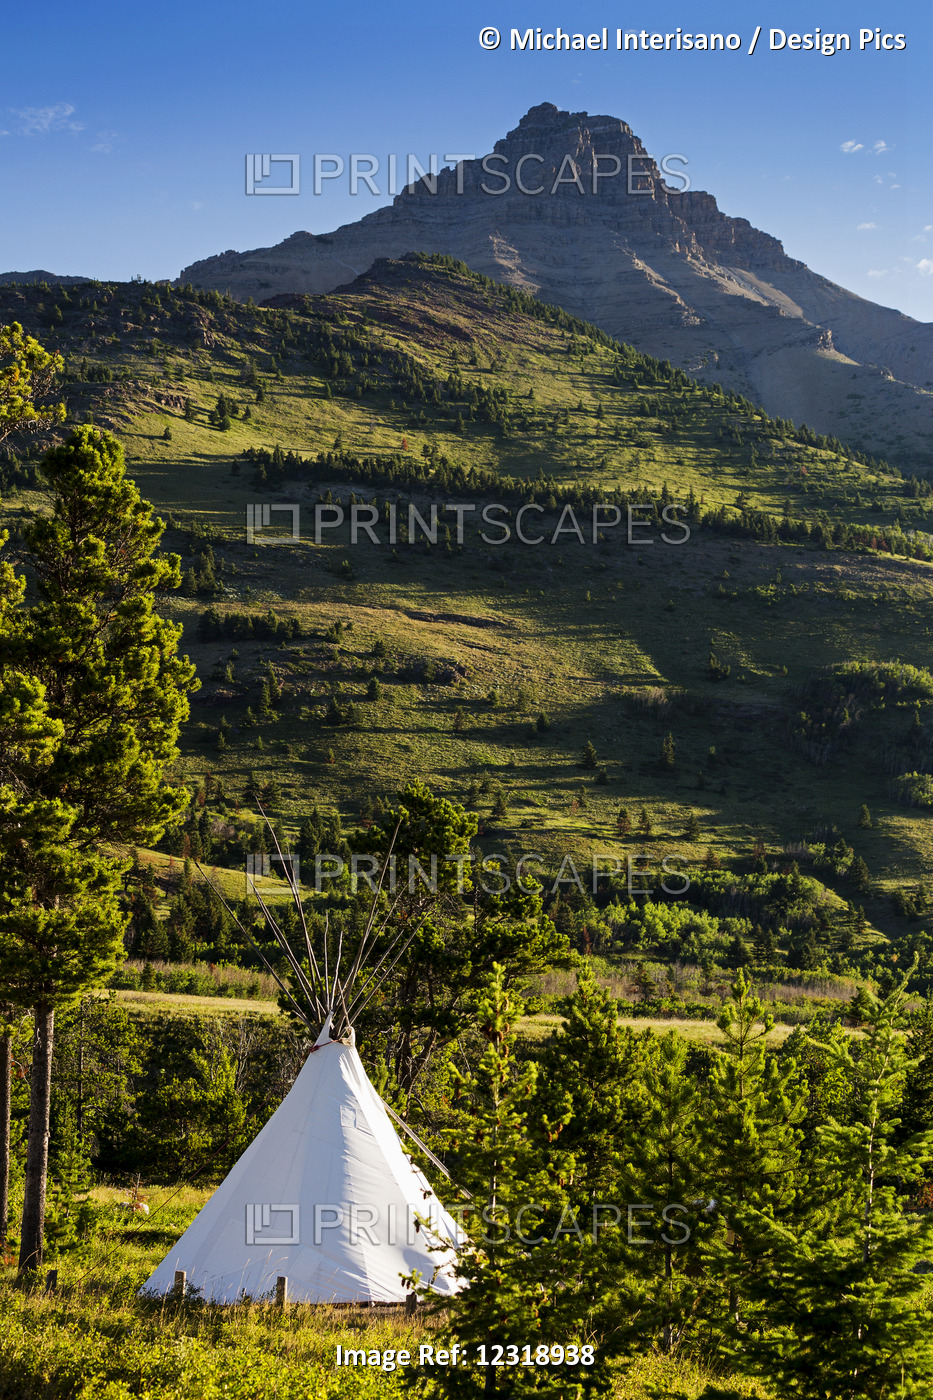 Large White Canvas Teepee In A Treed Field With Green Hillside And Mountain ...